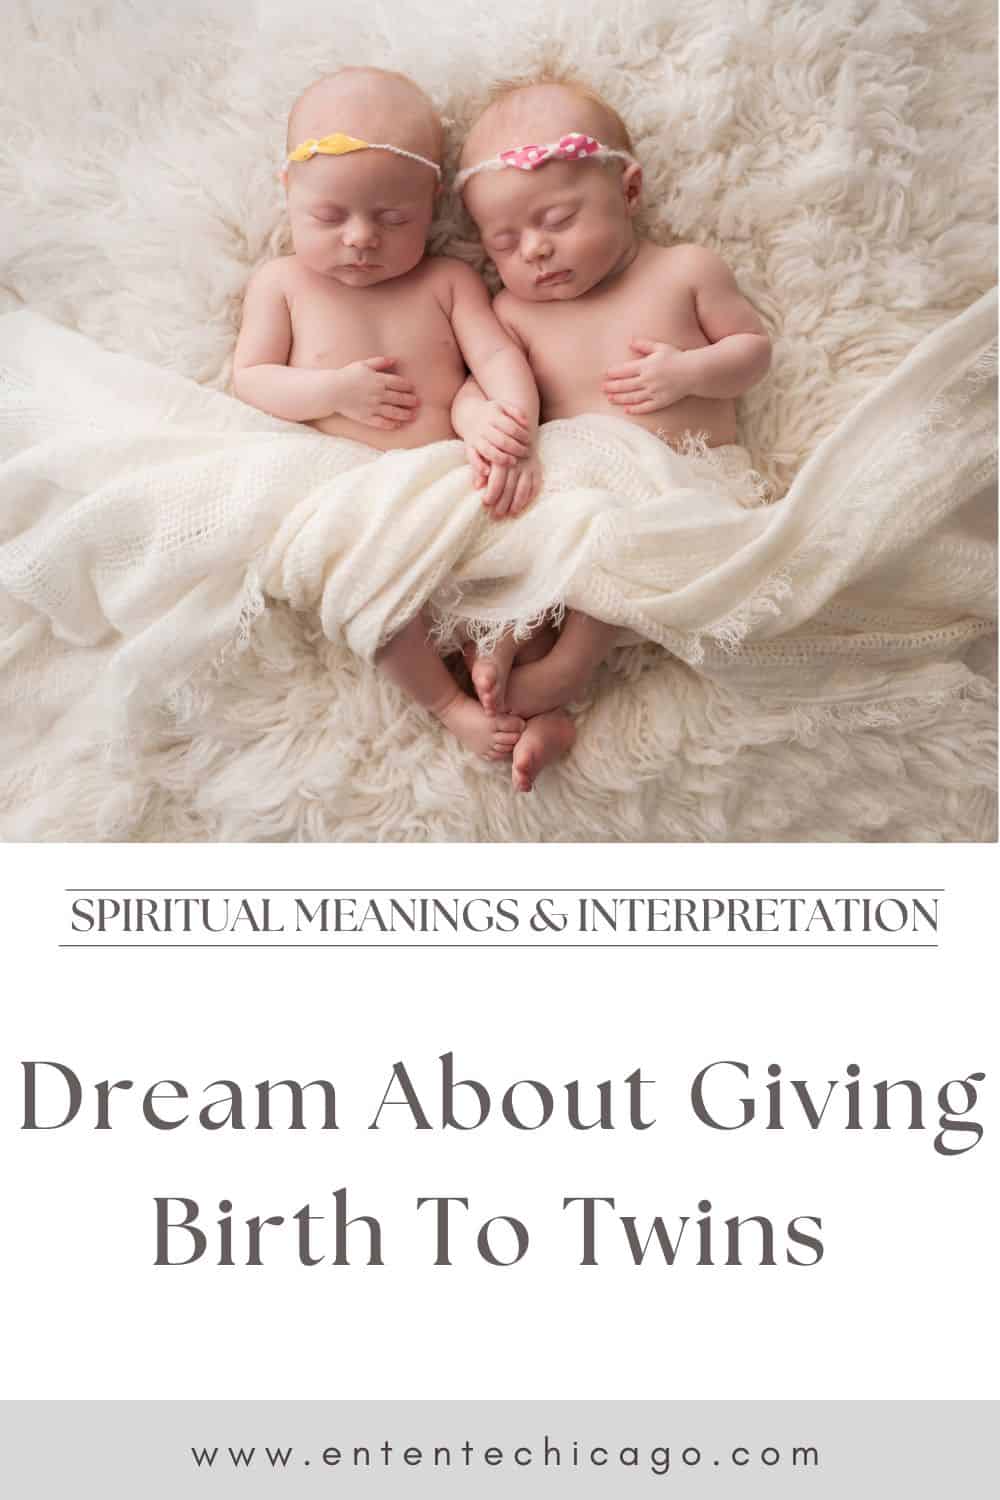 Dream About Giving Birth To Twins